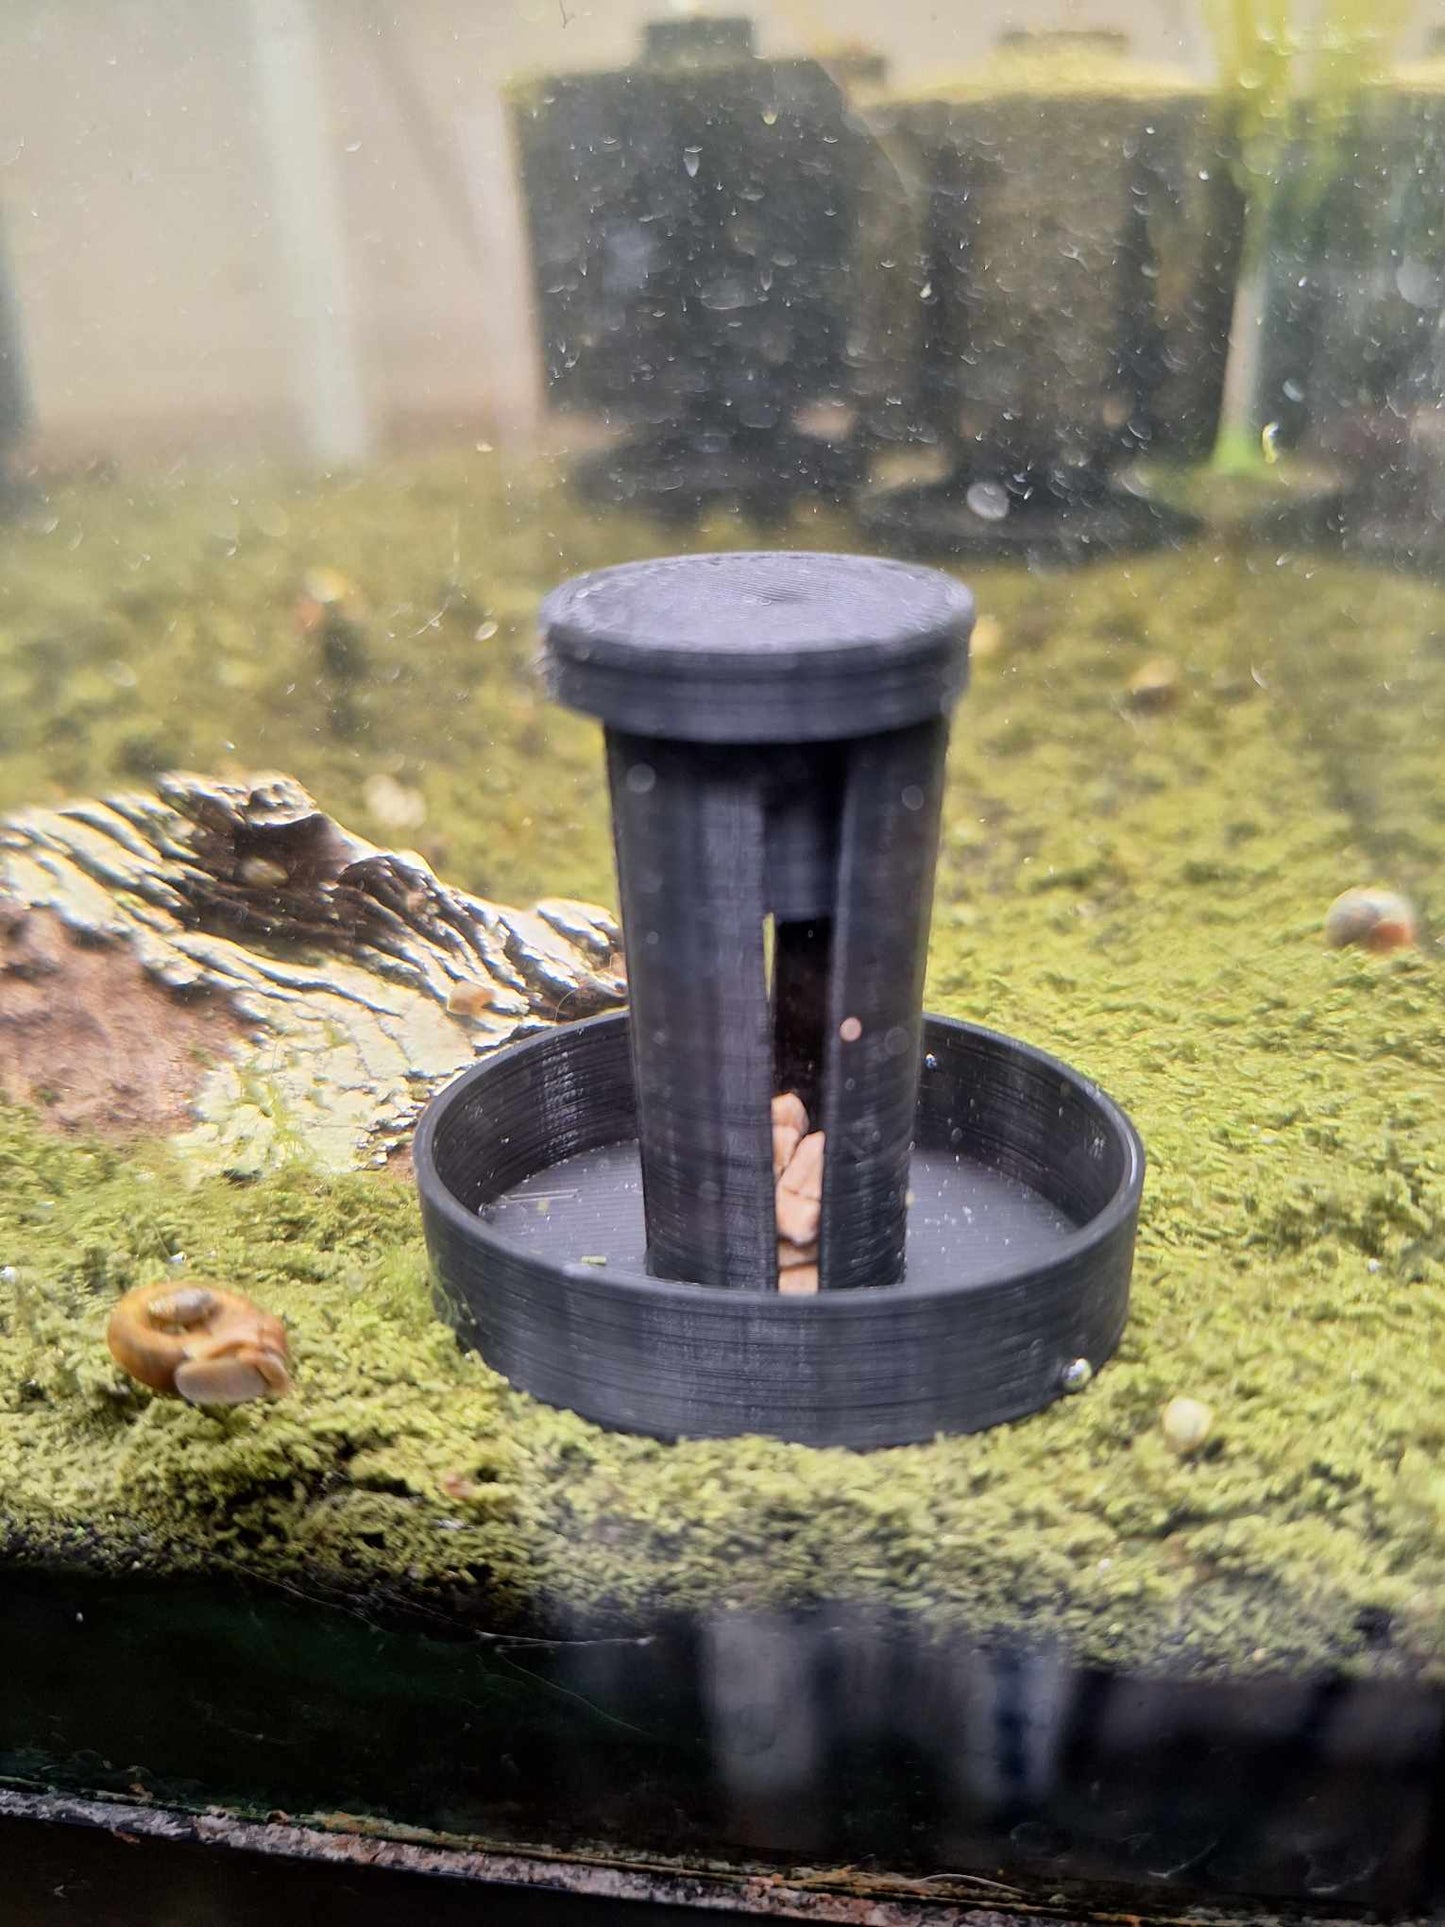 Initial stage of a timelapse: Overture black PETG Snail Saver Trap inside an aquarium, with bait placed in the central cylinder to attract snails, set against a background with detritus, snail waste, and active snails.